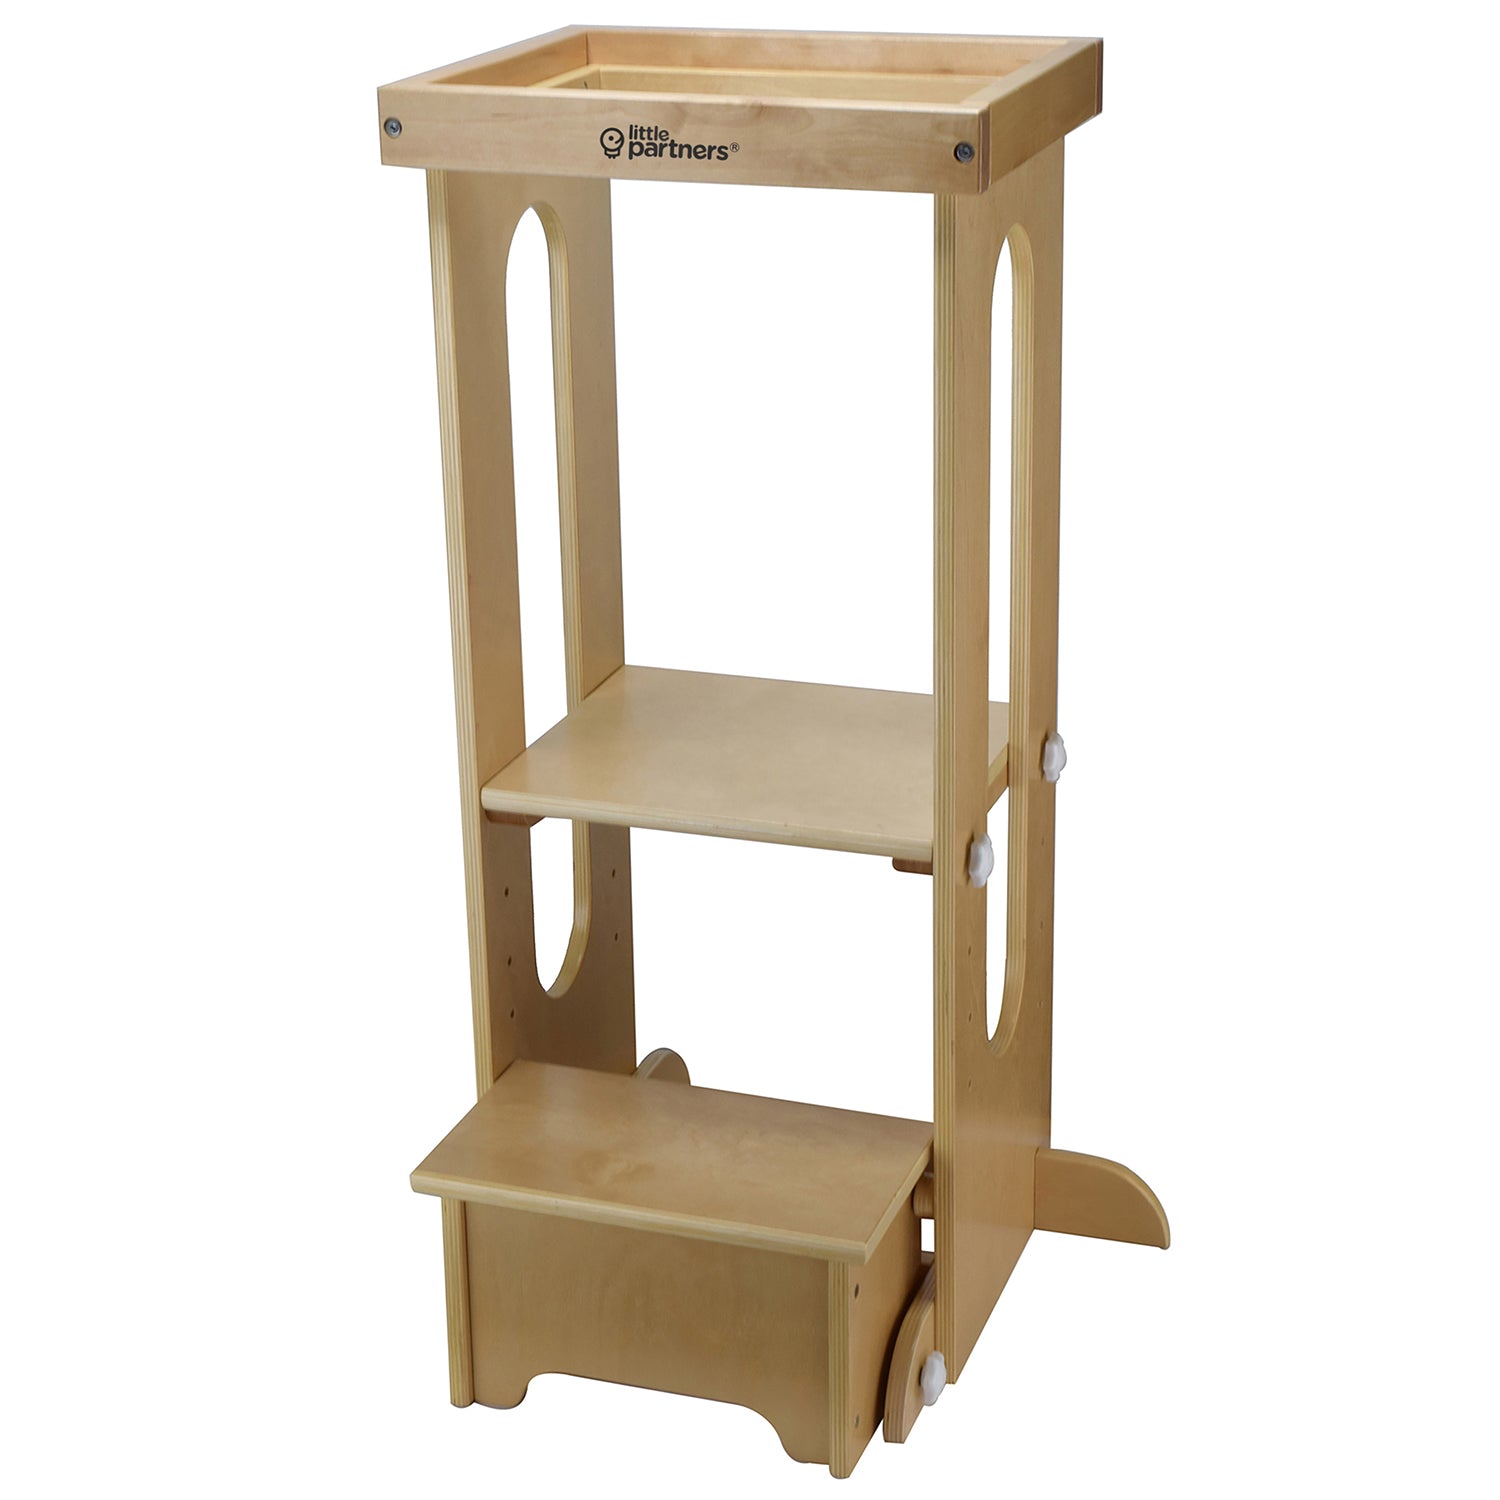 Explore ‘N Store™ Learning Tower® by Little Partners®